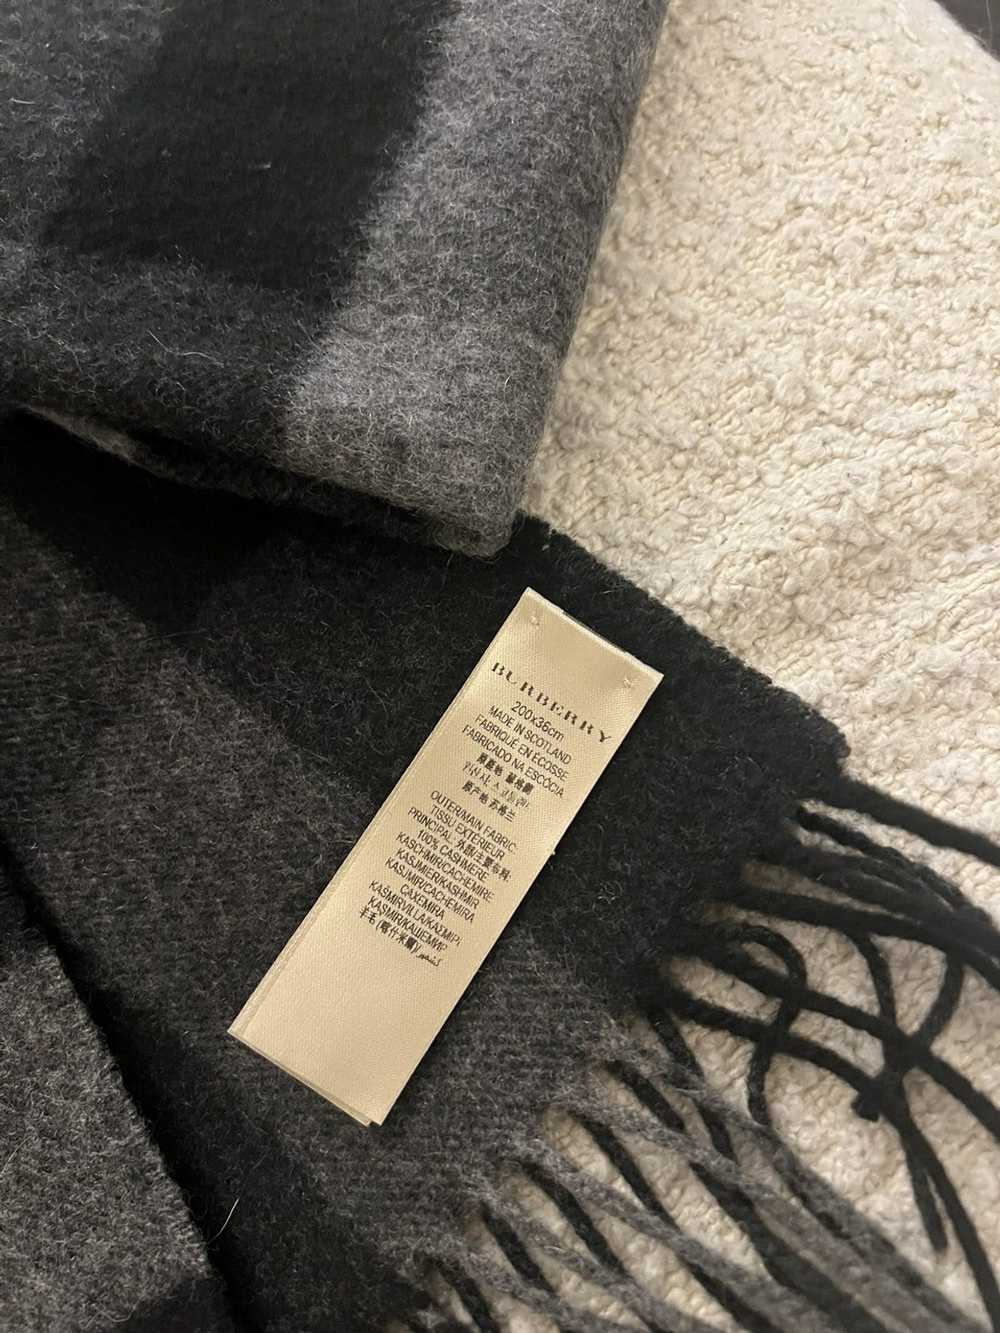 Burberry Burberry Check Cashmere Scarf in Charcoal - image 4